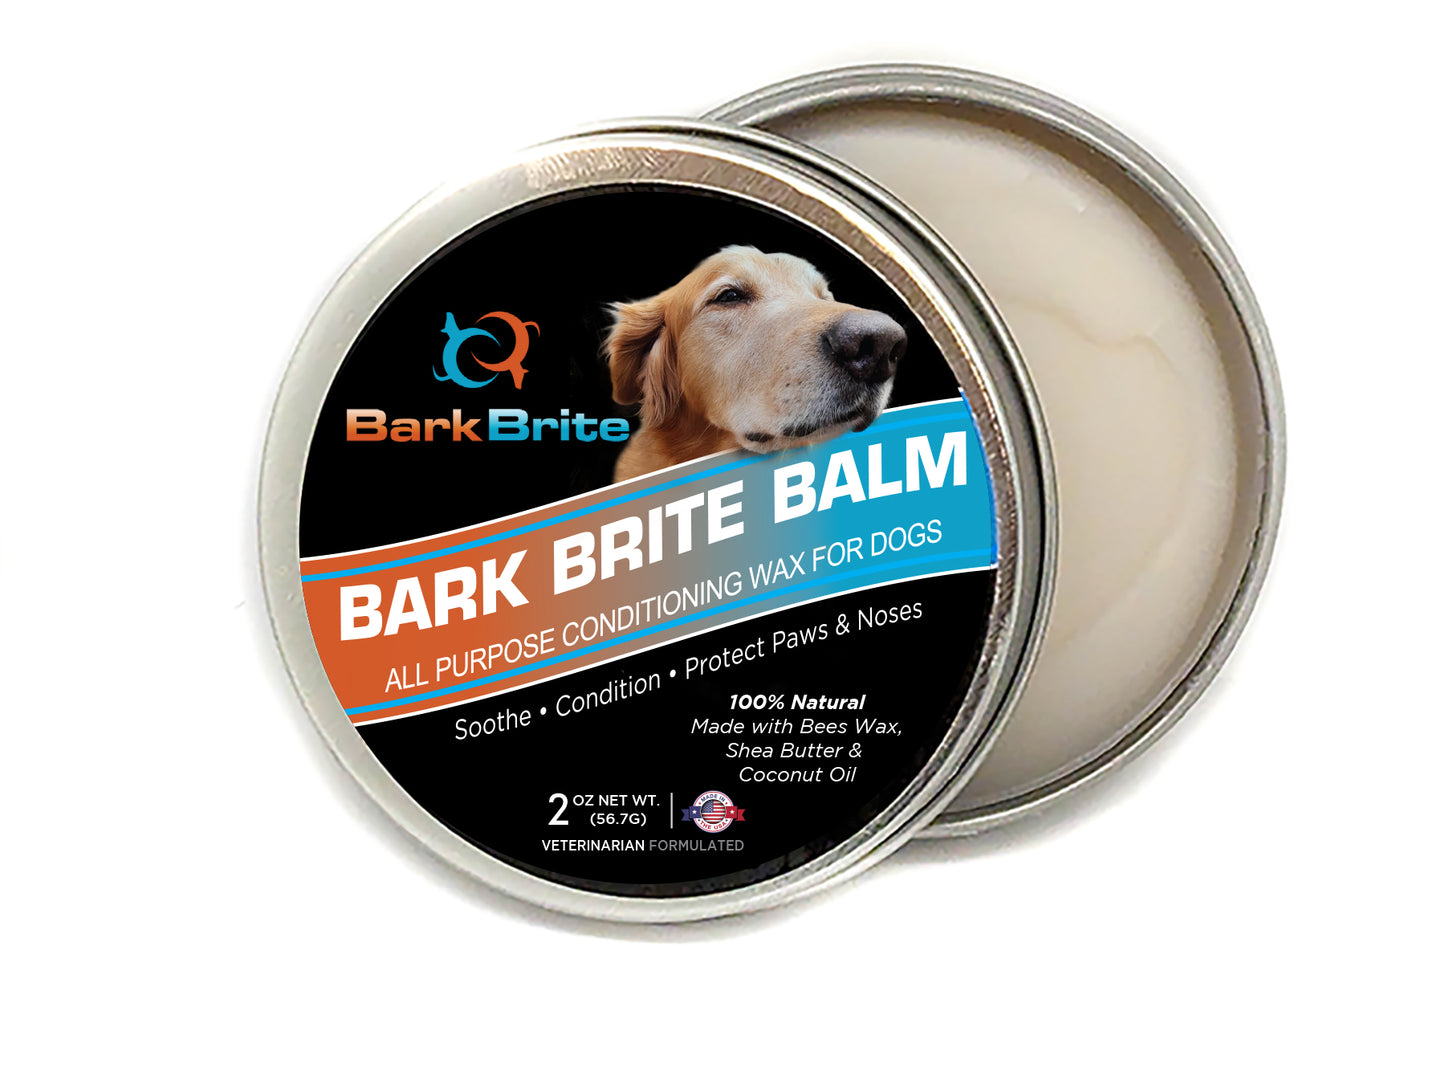 Bark Brite Balm- All Natural Conditioning Balm for Dog Paws and Noses